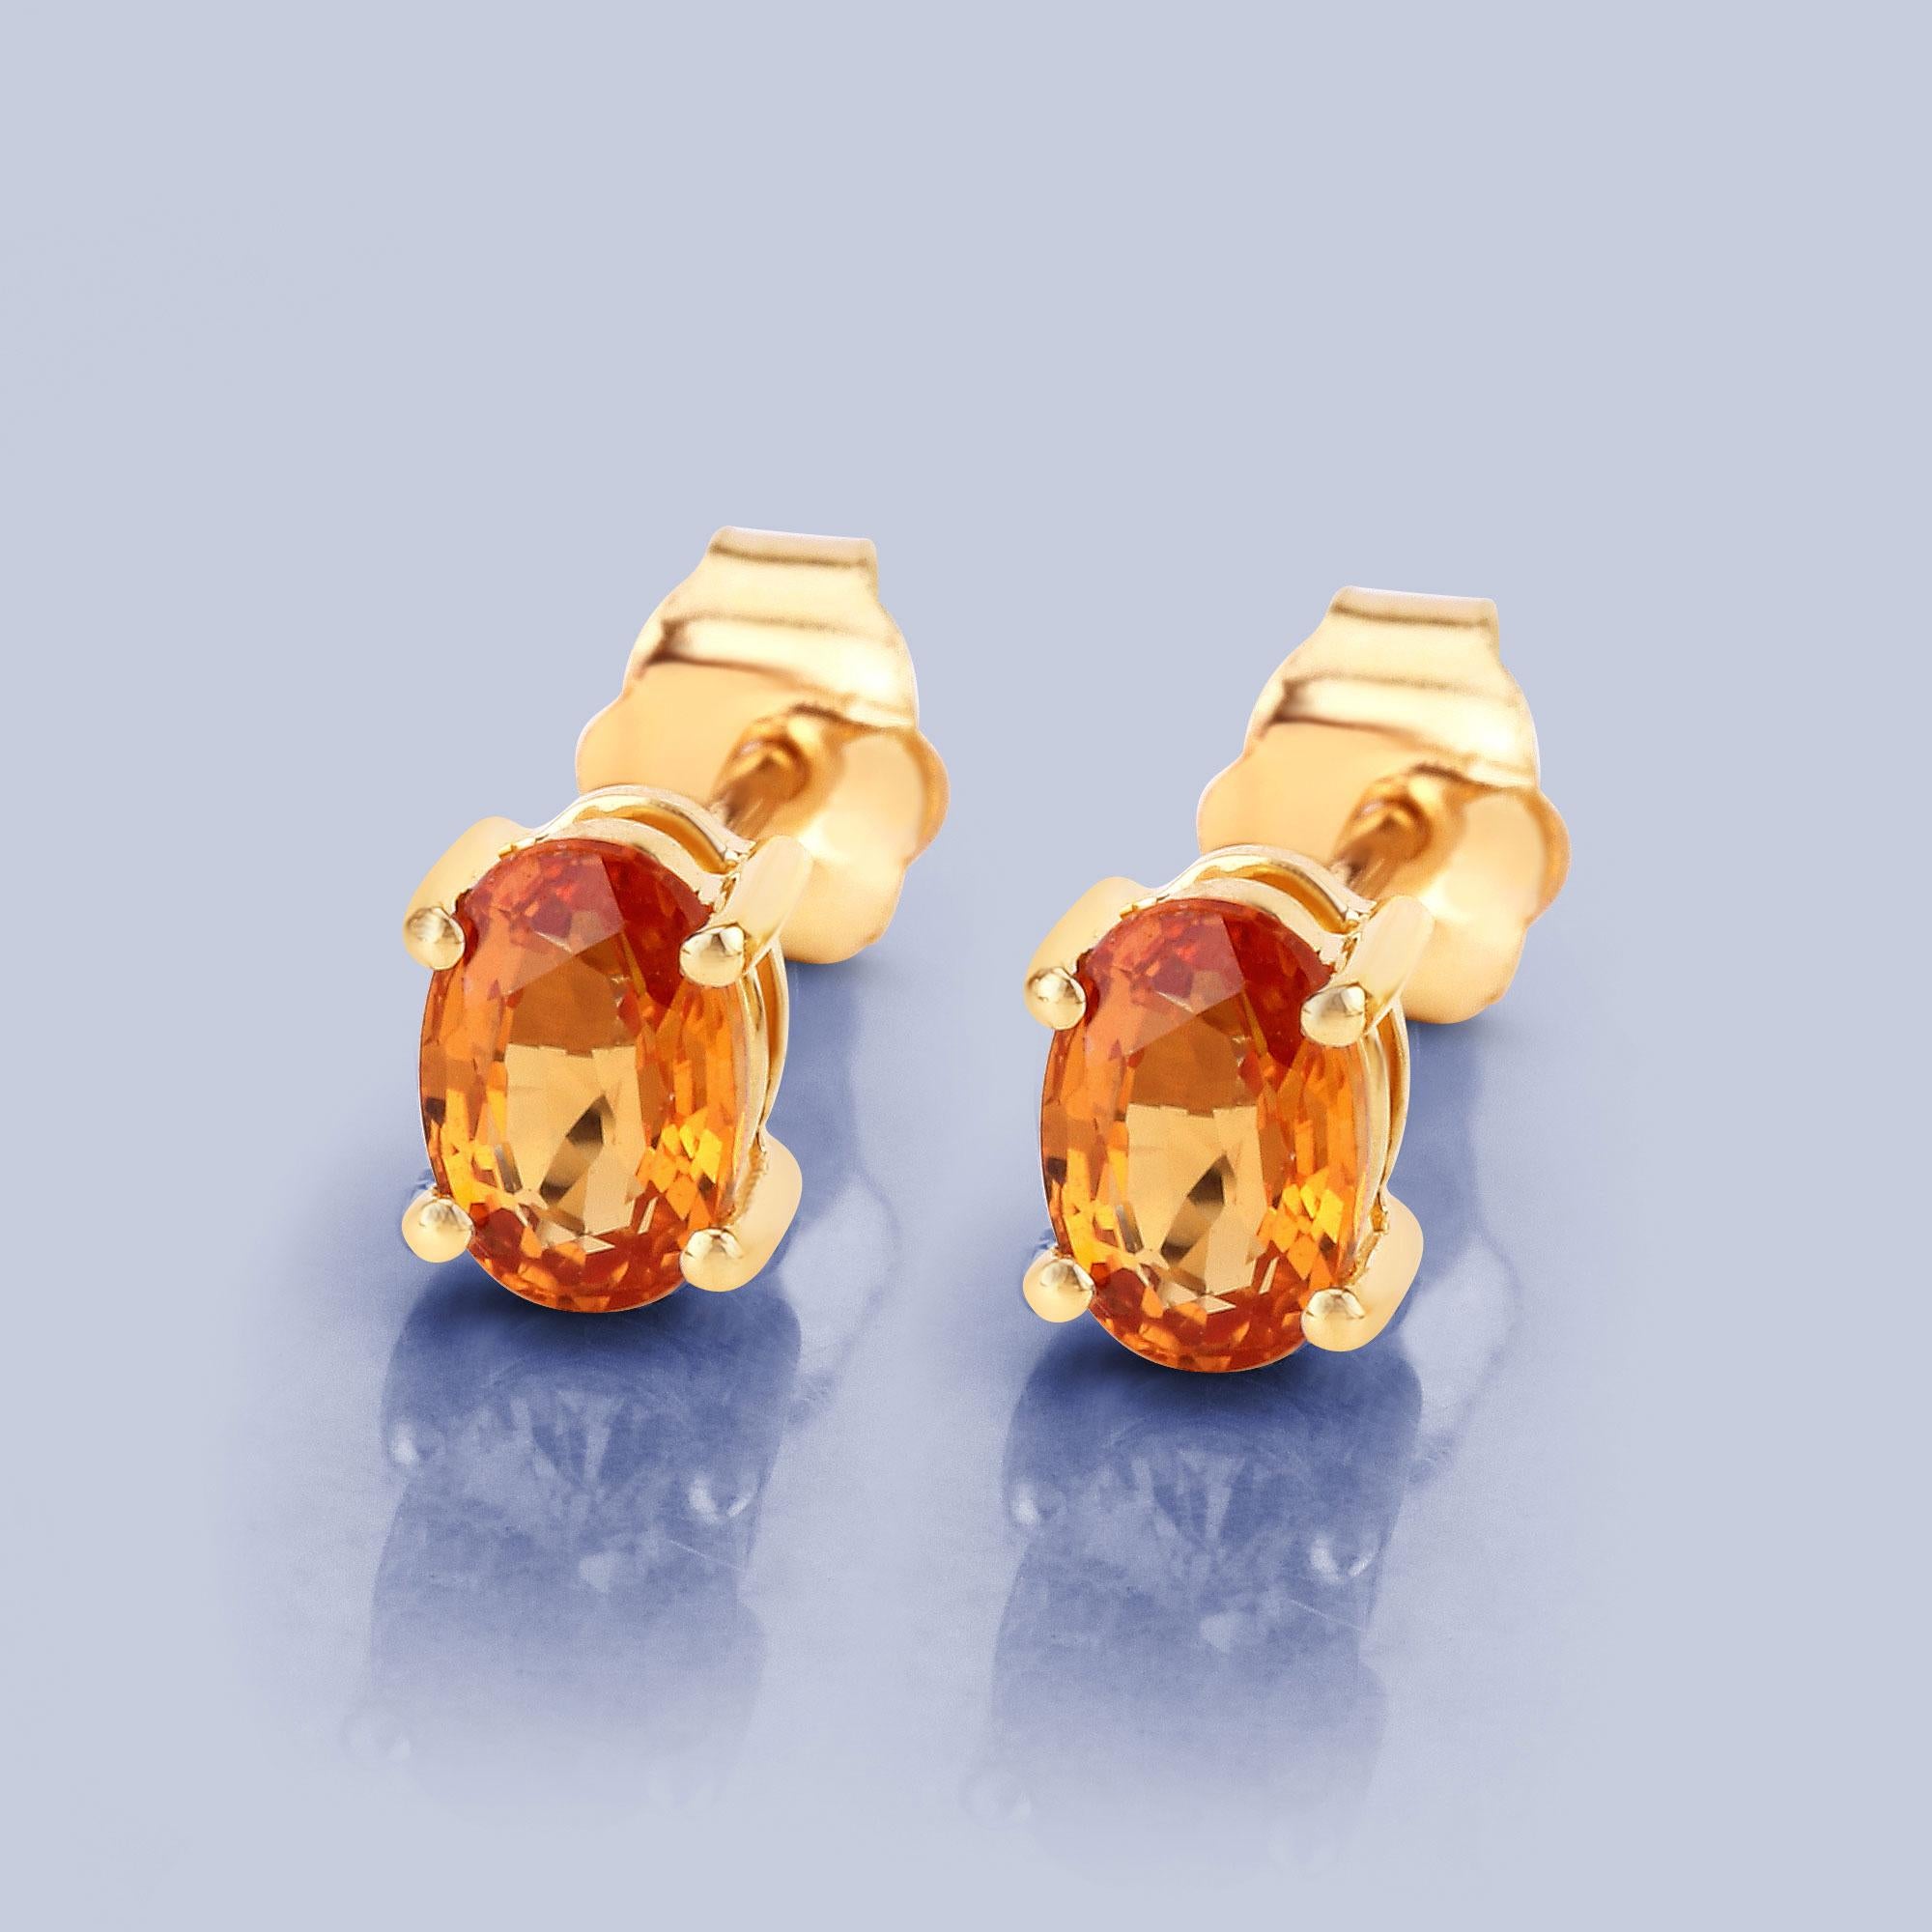 Oval Cut Orange Sapphire Stud Earrings 1.10 Carats Total 14K Yellow Gold For Sale